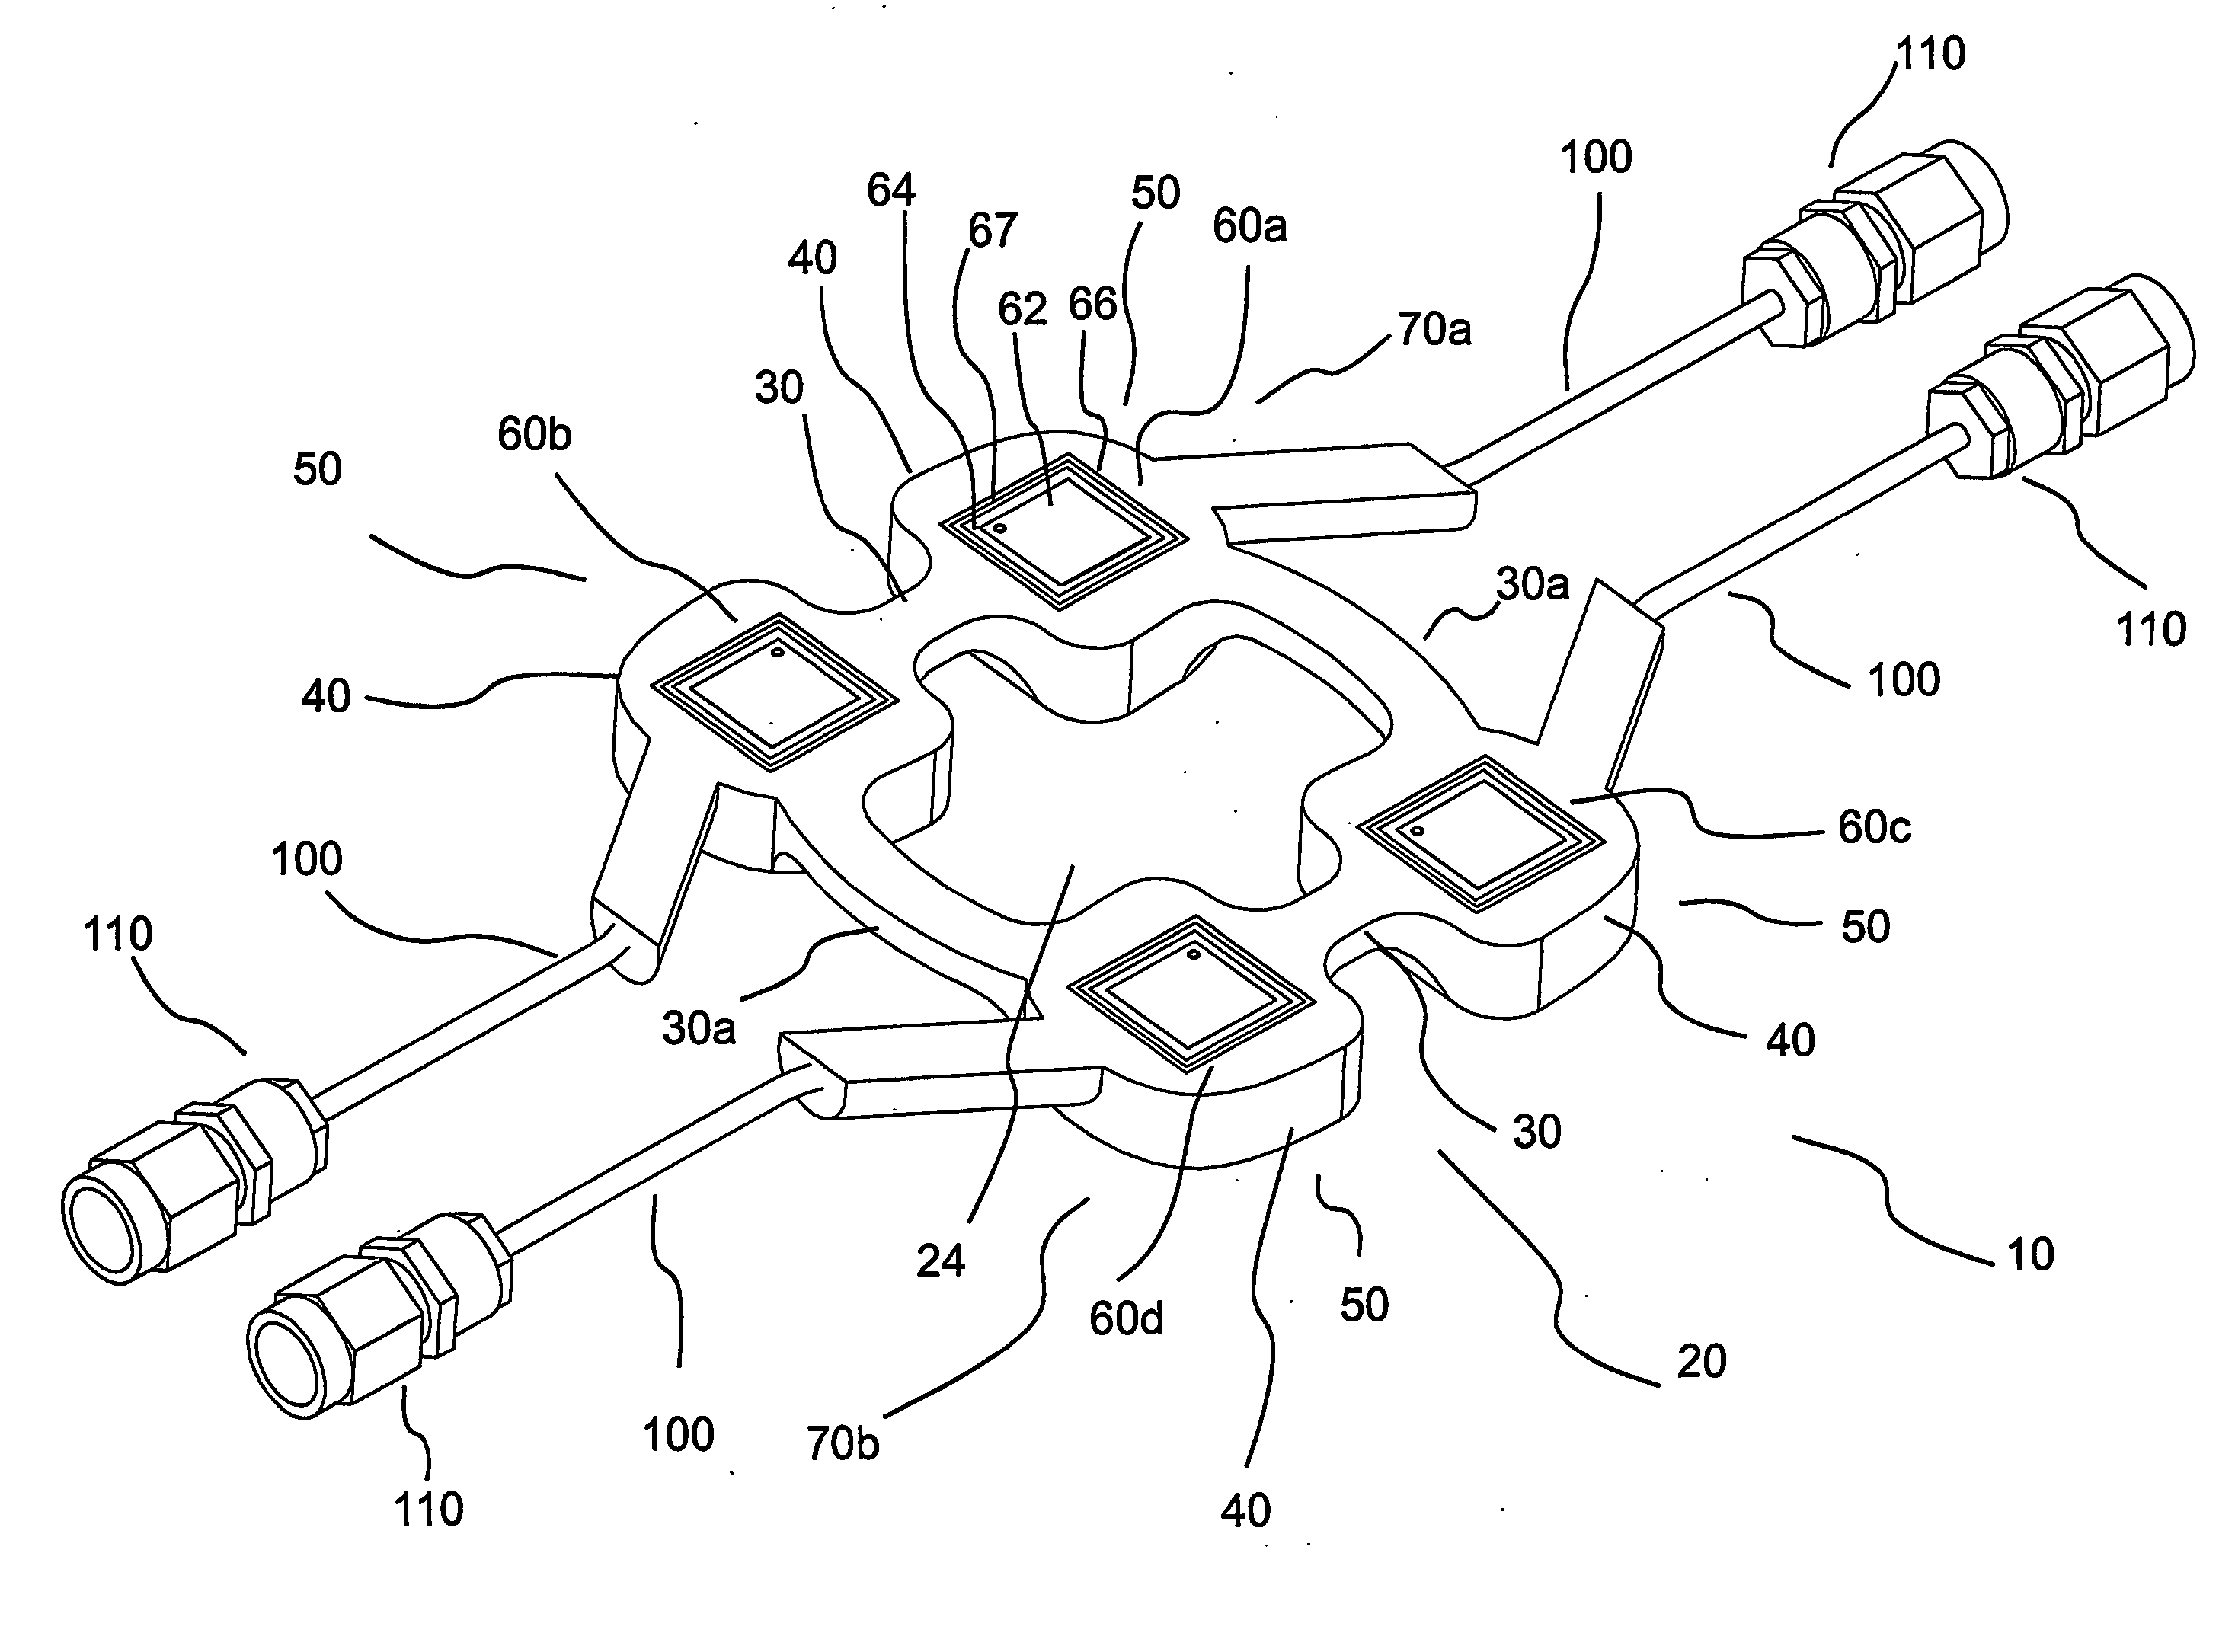 System for detecting fluid changes and sensoring devices therefor